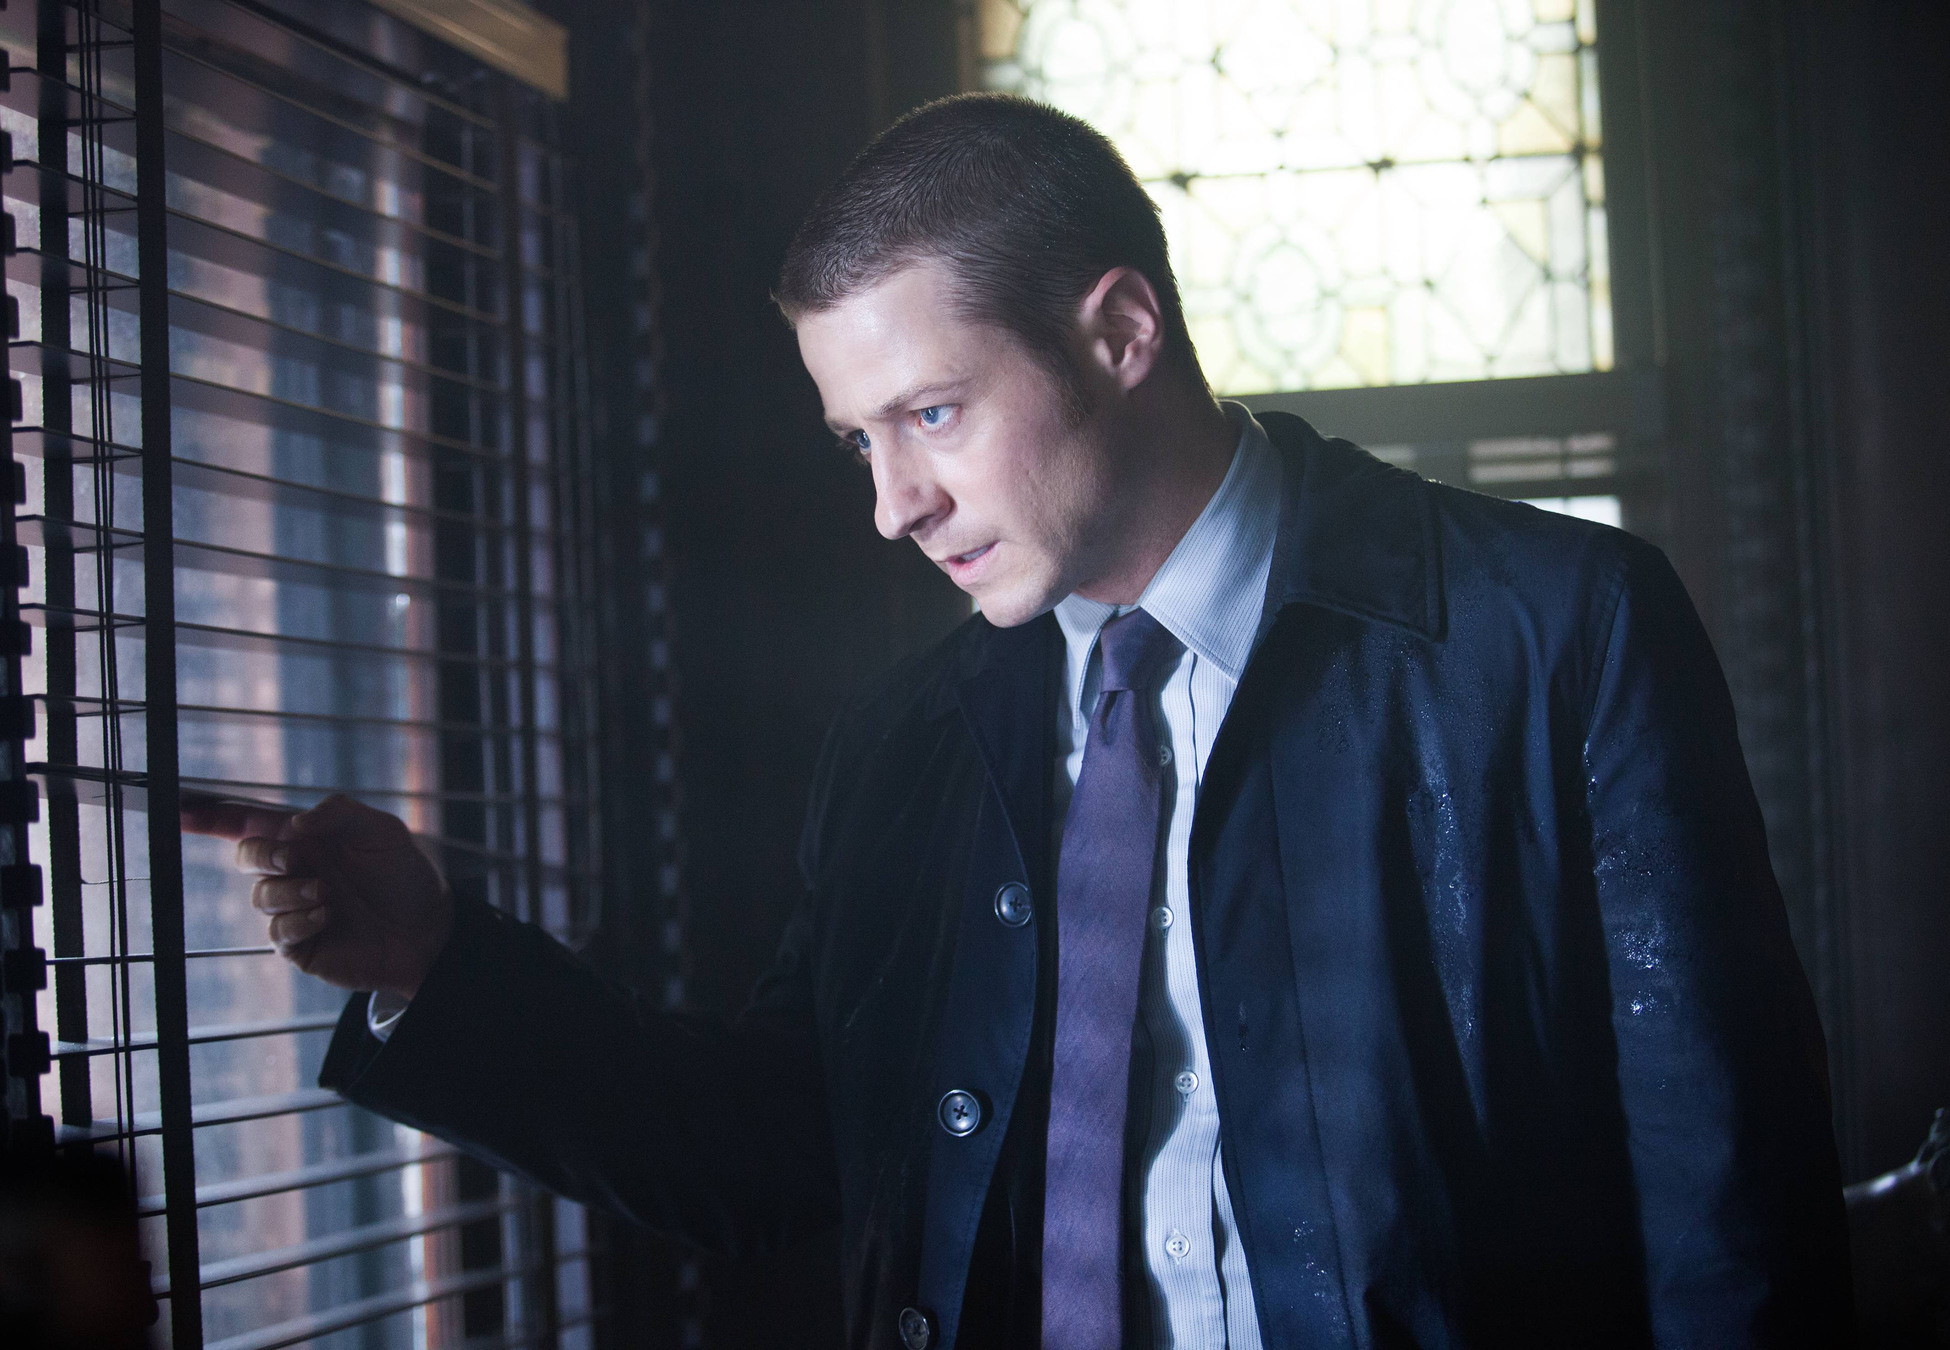 GOTHAM: Detective James Gordon (Ben McKenzie) looks out for a criminal targeting the Mayor's life in the "Arkham" episode of GOTHAM airing Monday, Oct. 13 (8:00-9:00 PM ET/PT) on FOX. Â©2014 Fox Broadcasting Co. Cr: Jessica Miglio/FOX